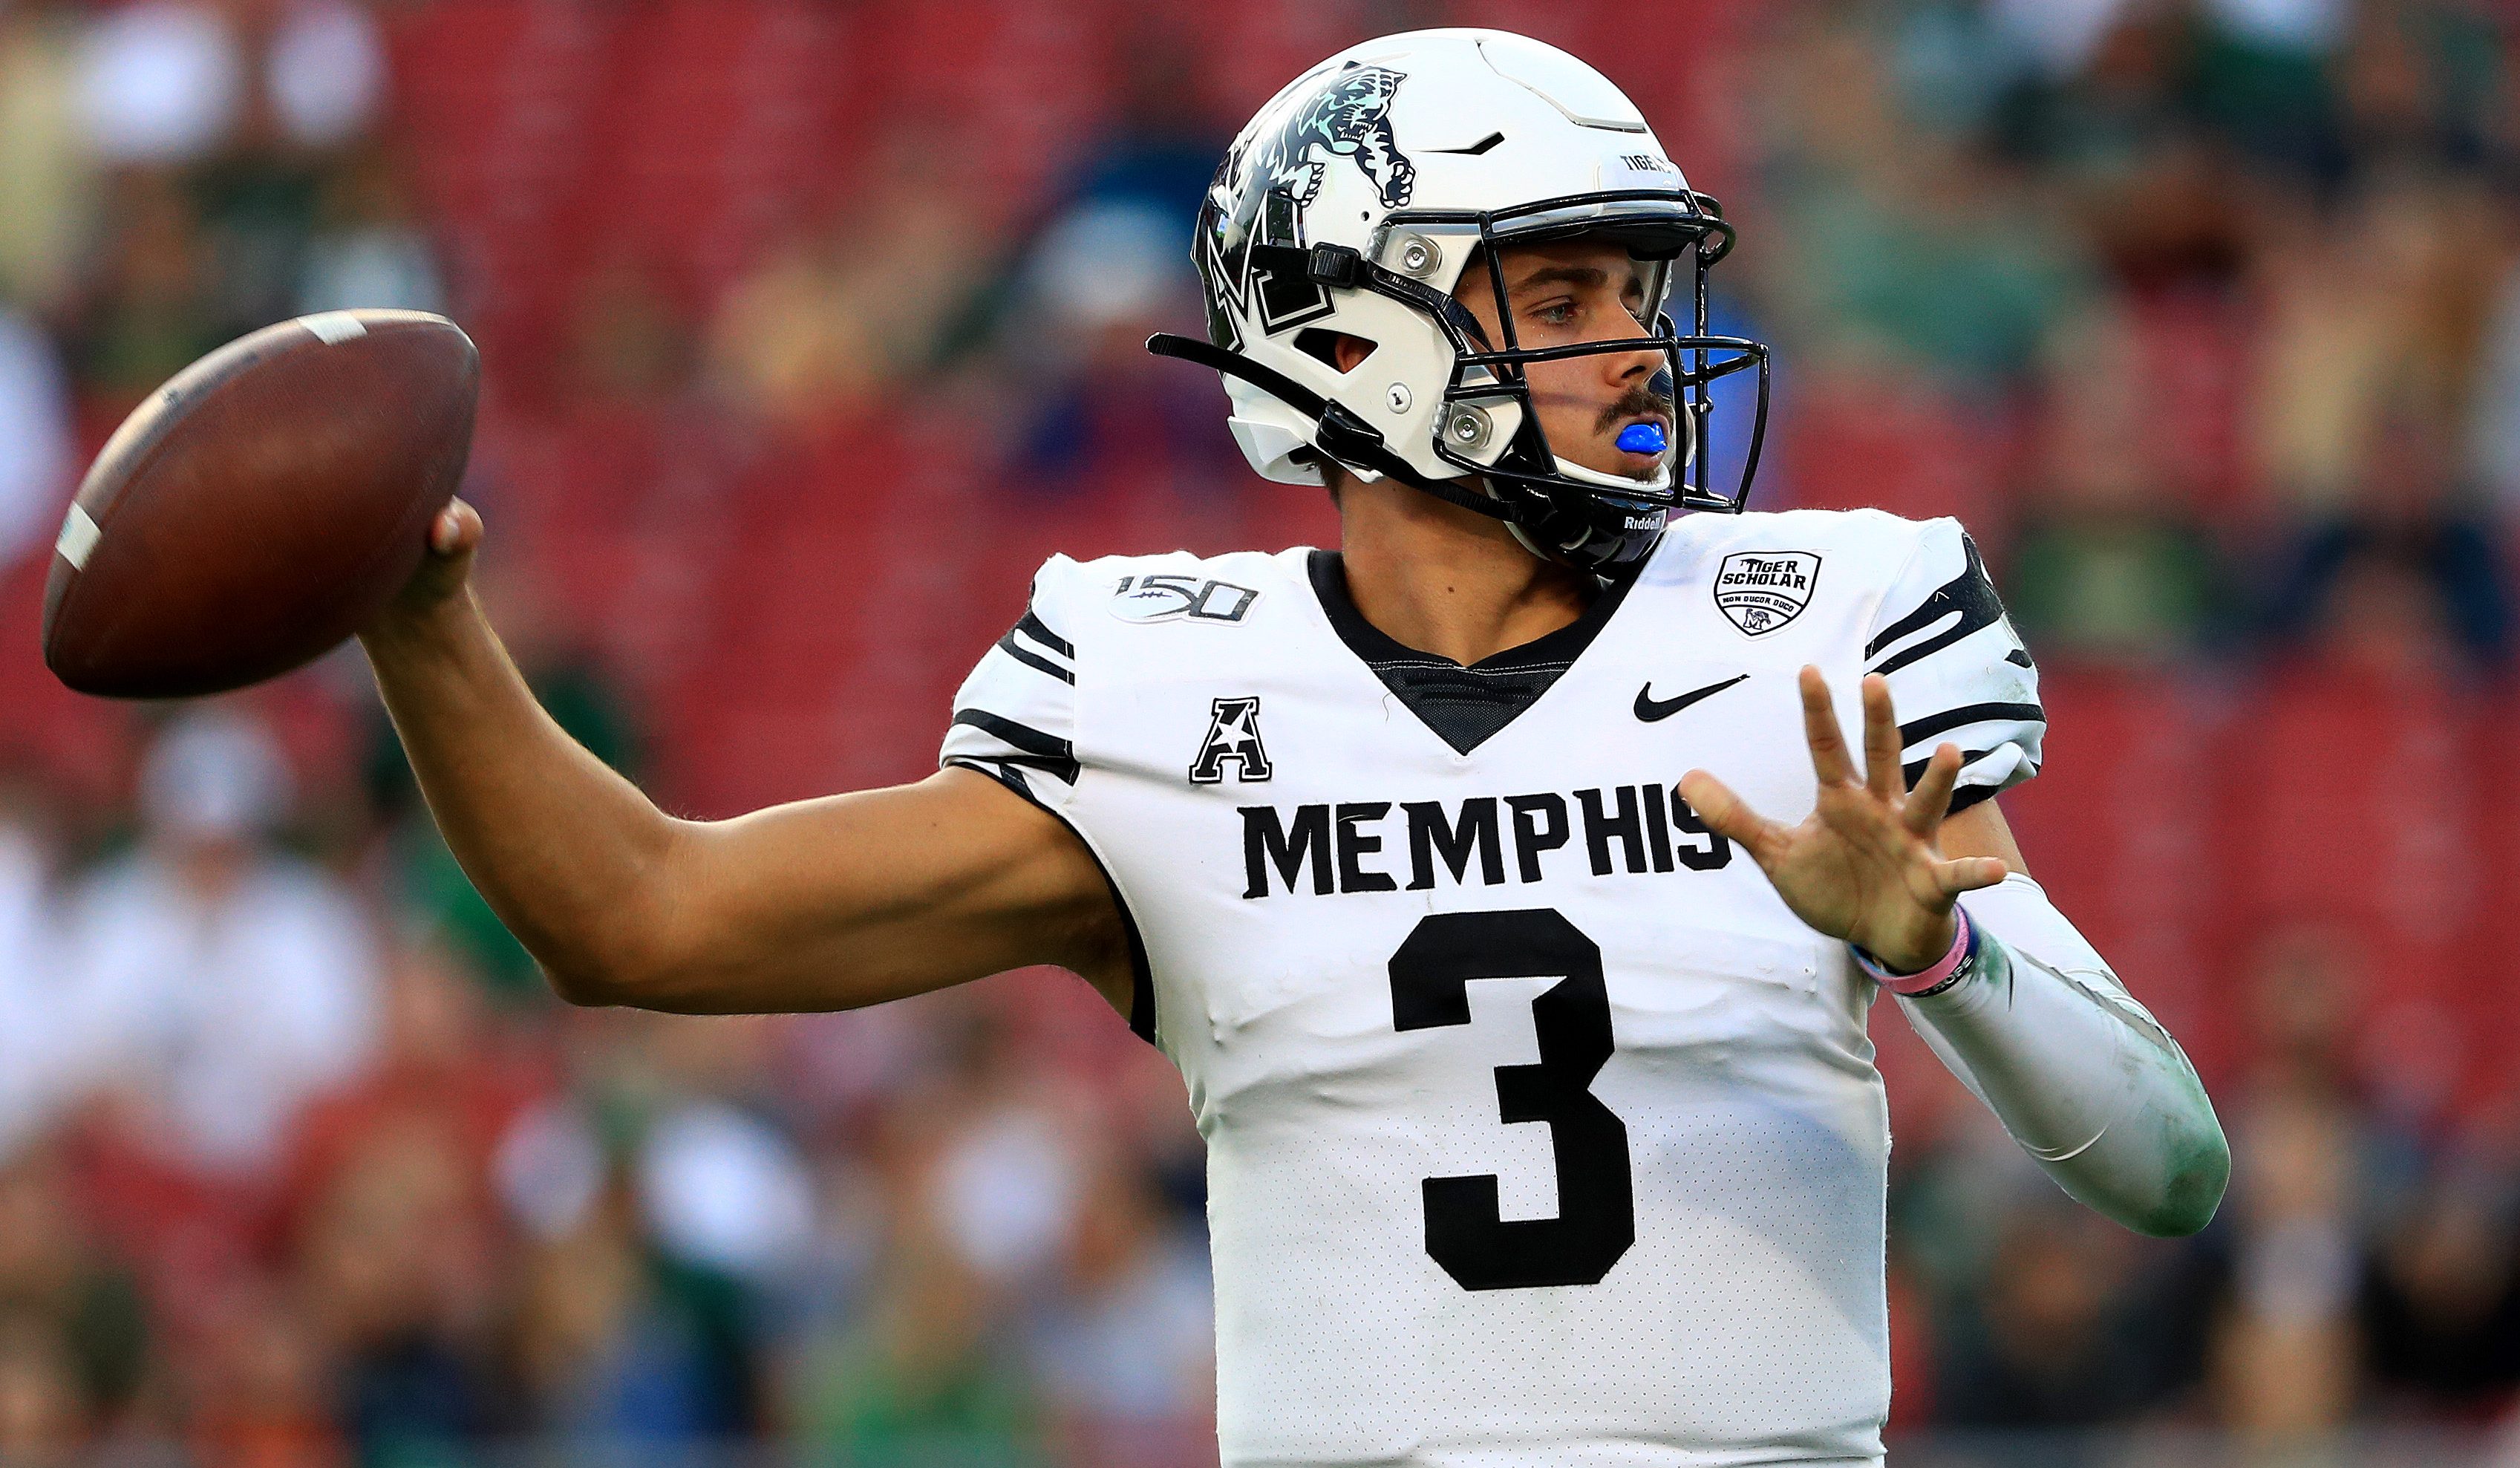 How to Watch Memphis Football Online Without Cable